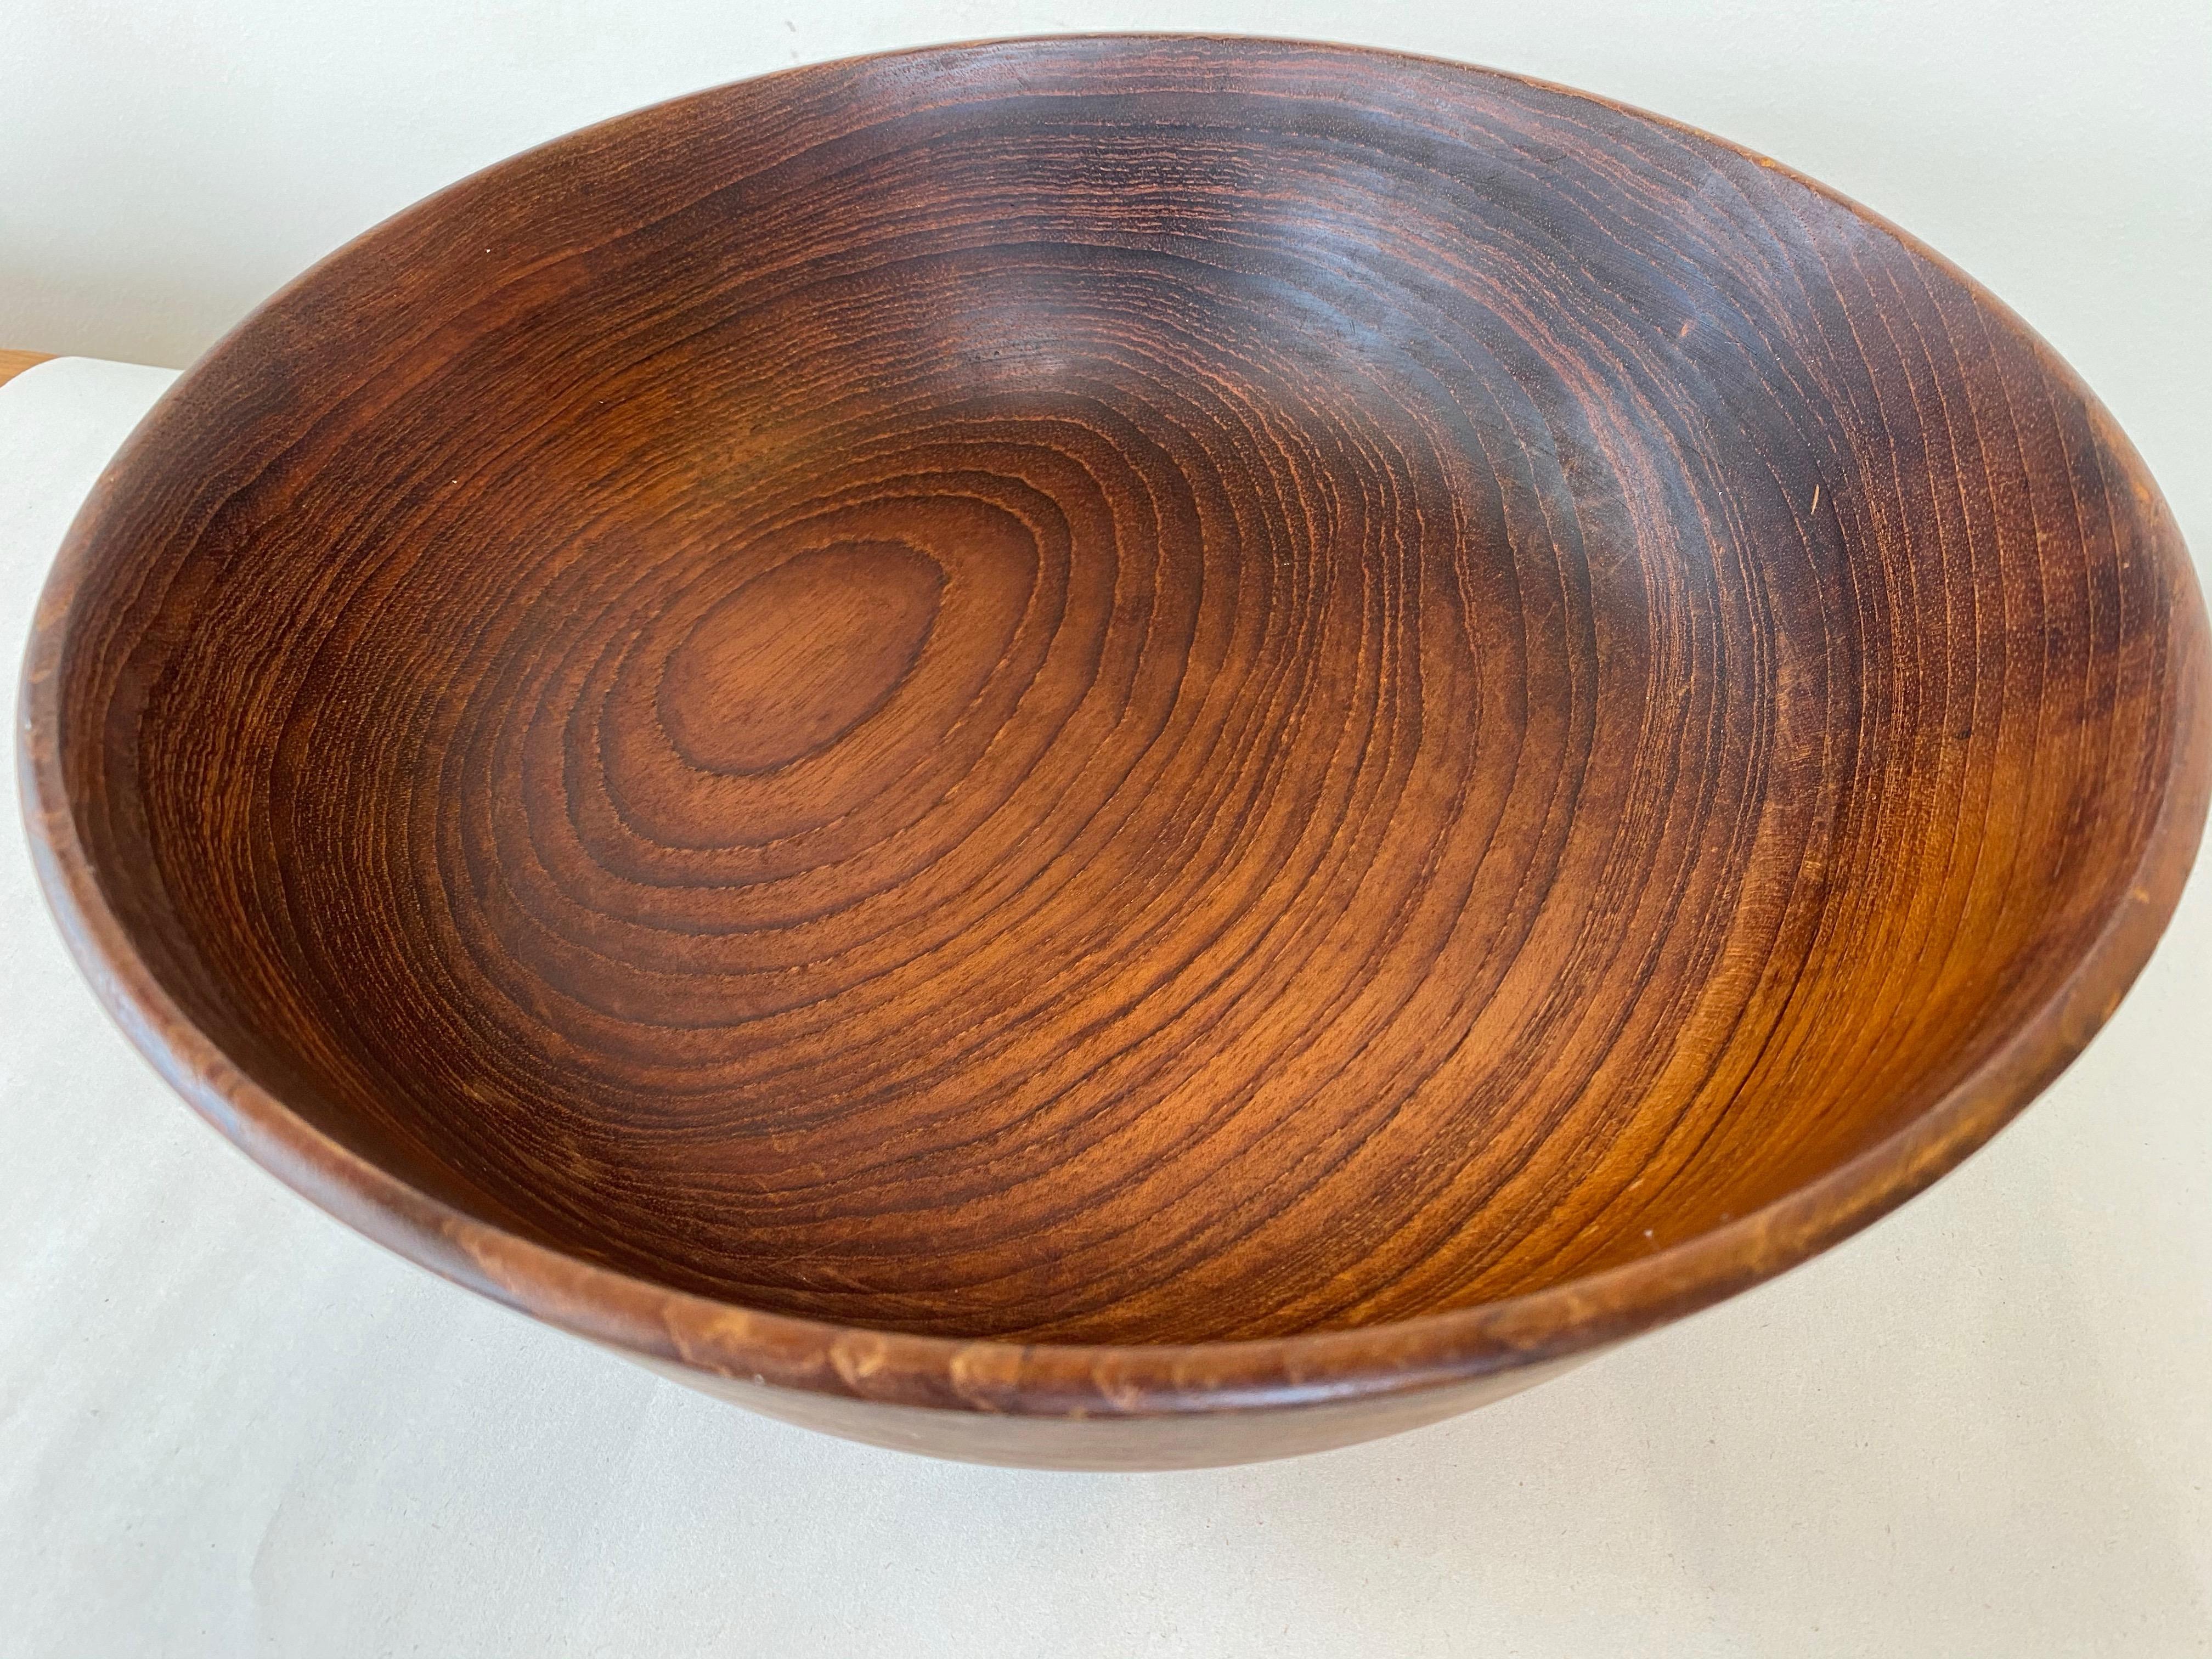 Bob Stocksdale Teak Turned Wood Bowl with Exceptional Grain Pattern, Early 1970s For Sale 7